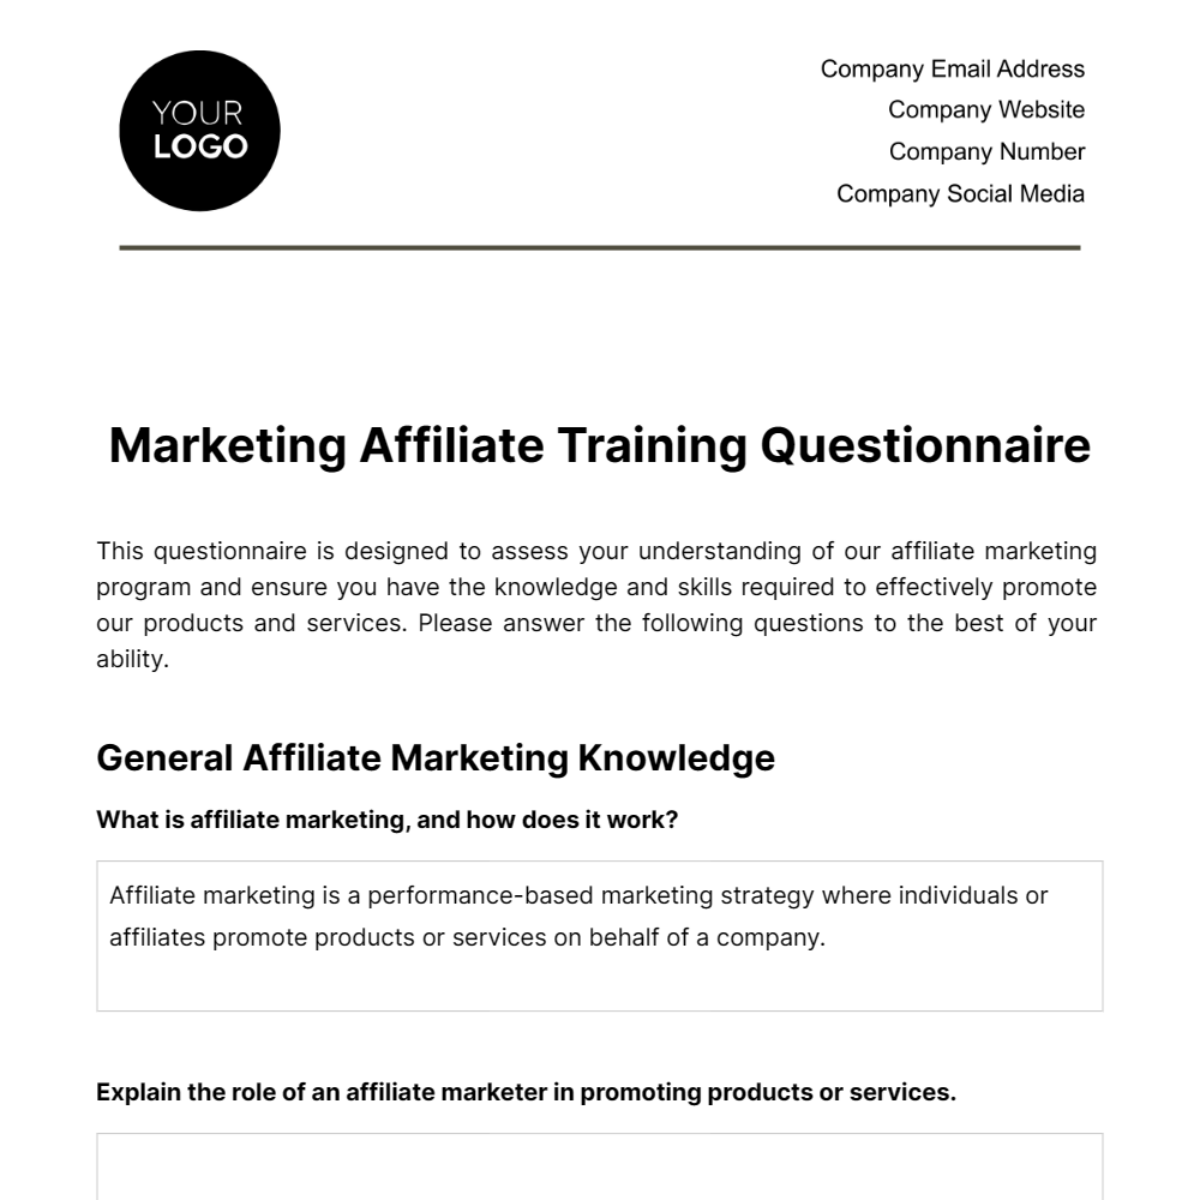 Free Marketing Affiliate Training Questionnaire Template